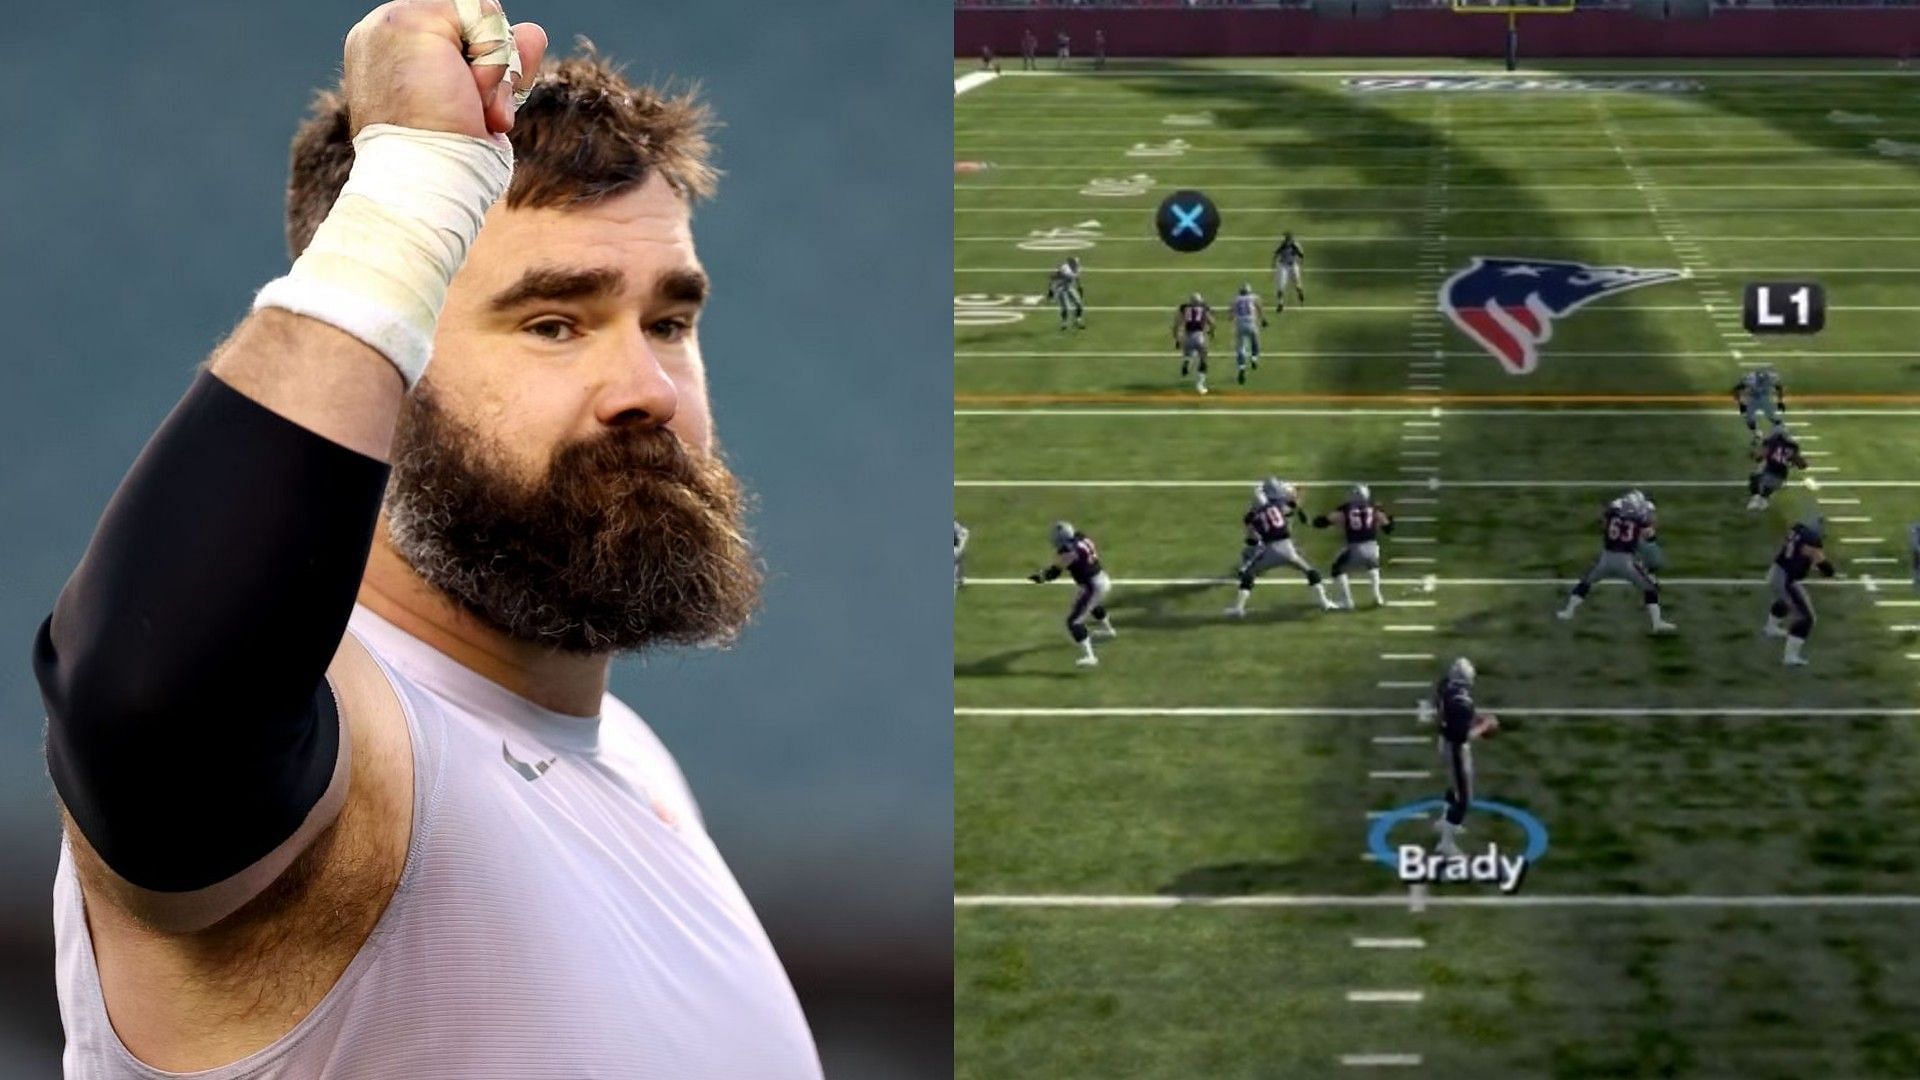 Jason Kelce calls out EA over getting skipped for Madden 12 - Courtesy of IGcompany on YouTube